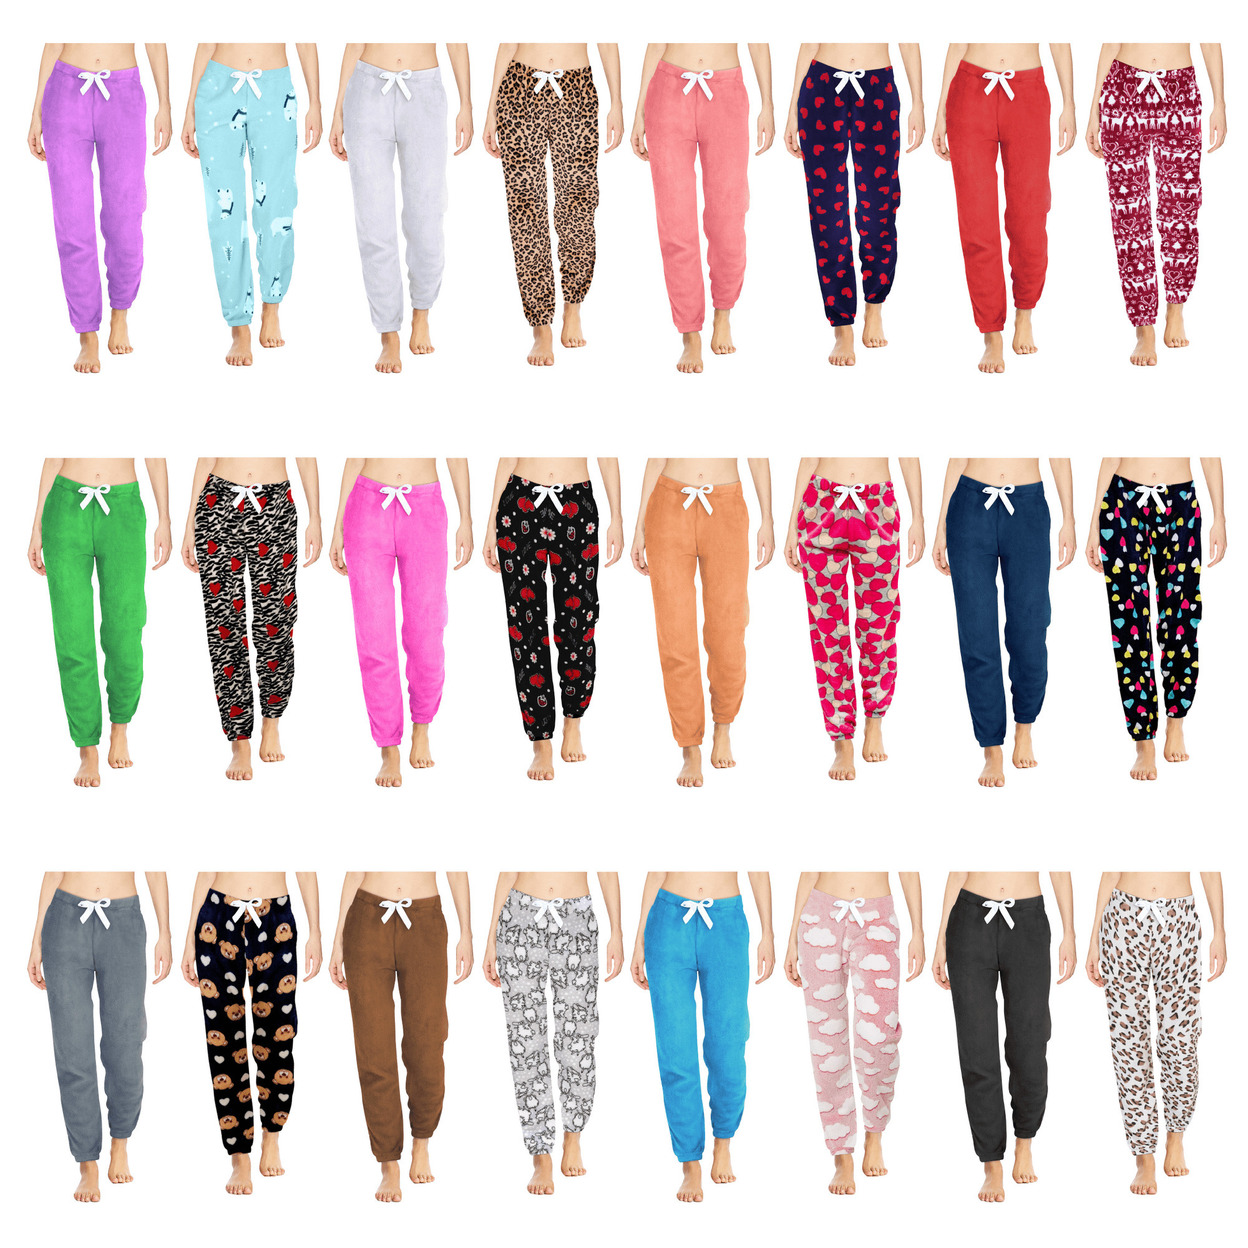 Multi-Pack: Women's Solid & Printed Ultra-Soft Comfy Stretch Micro-Fleece Pajama Lounge Pants - 3-pack, Small, Solid